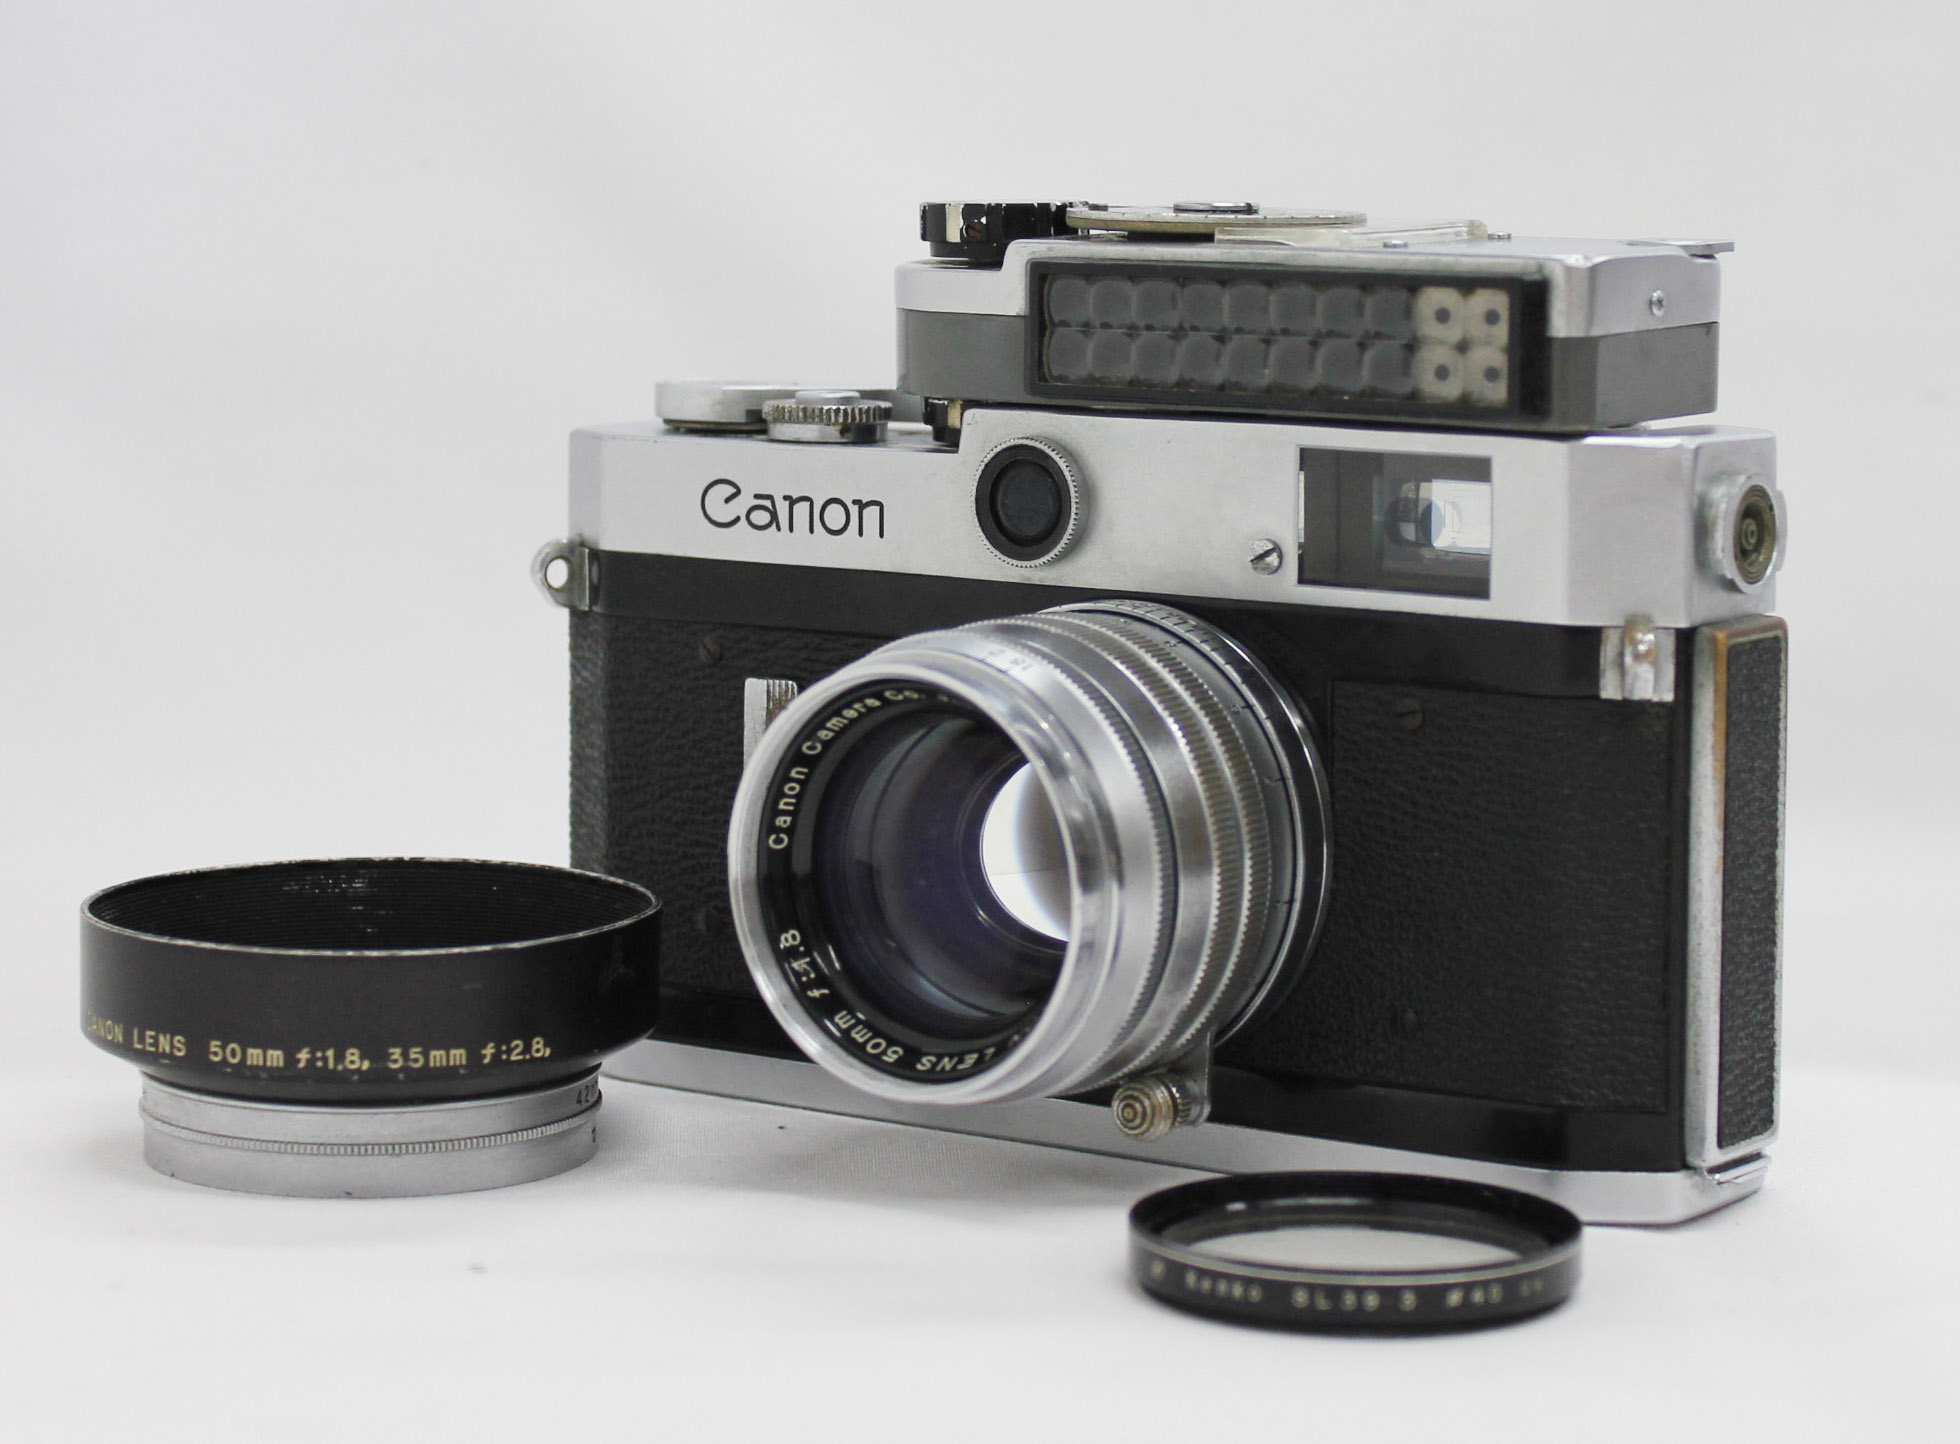 Canon P Rangefinder 35mm Film Camera with 50mm F/1.8 & Meter from Japan